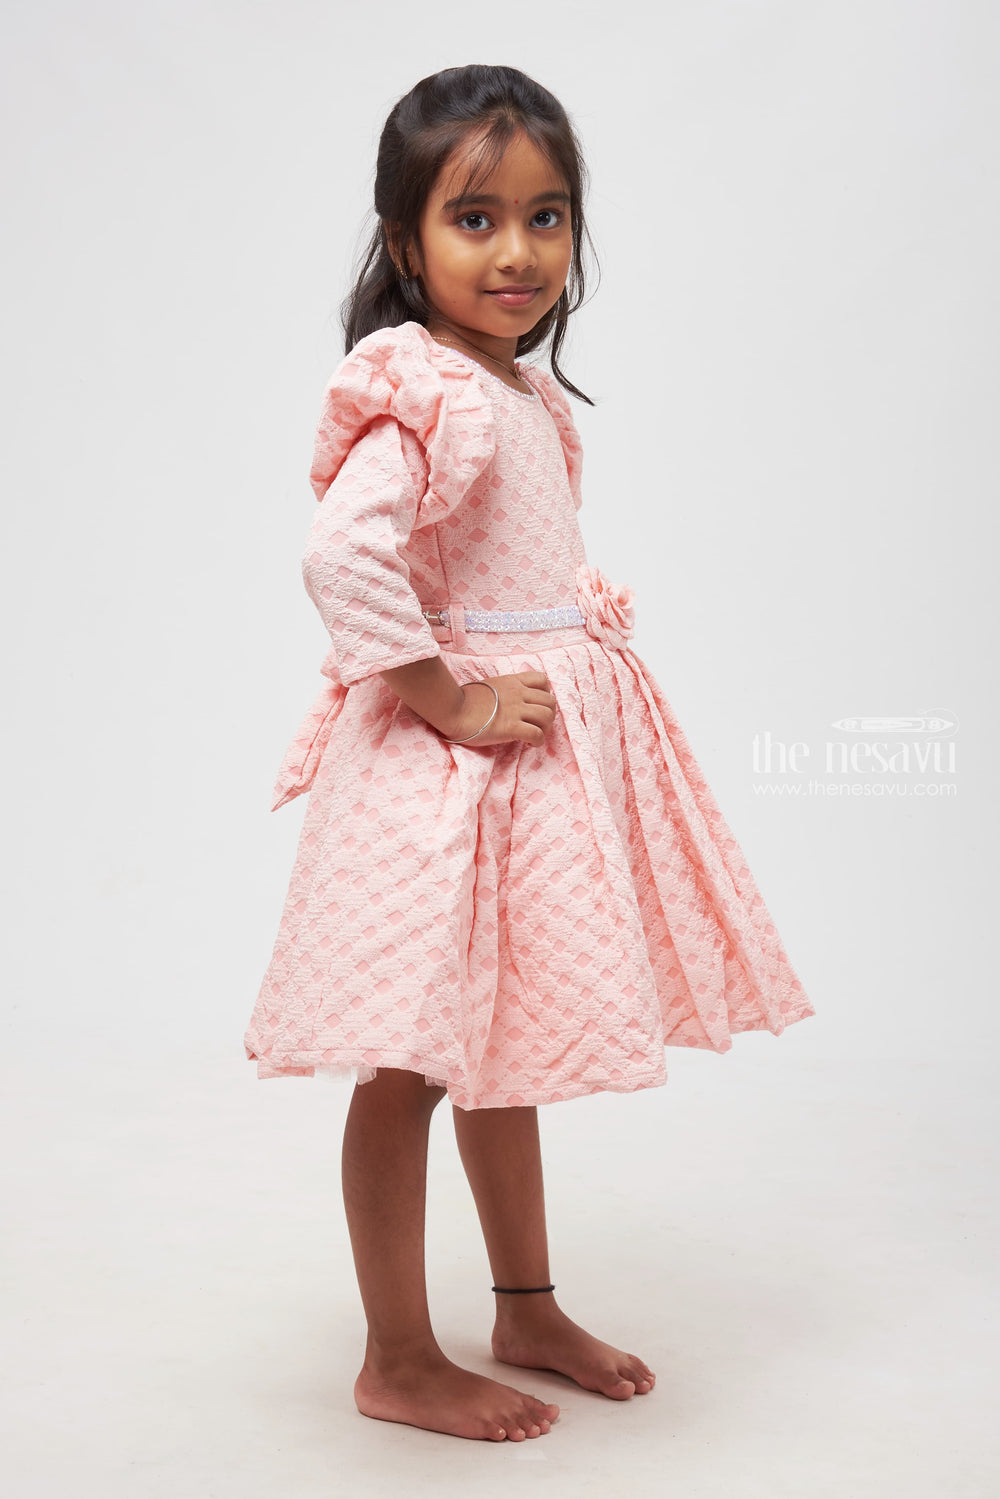 The Nesavu Girls Fancy Party Frock Adorable Pink Dress with Patterned Design & Rose Embellishment for Girls Nesavu Patterned Pink Dress with Rose Detail - Elegant Wear for Young Girls | The Nesavu